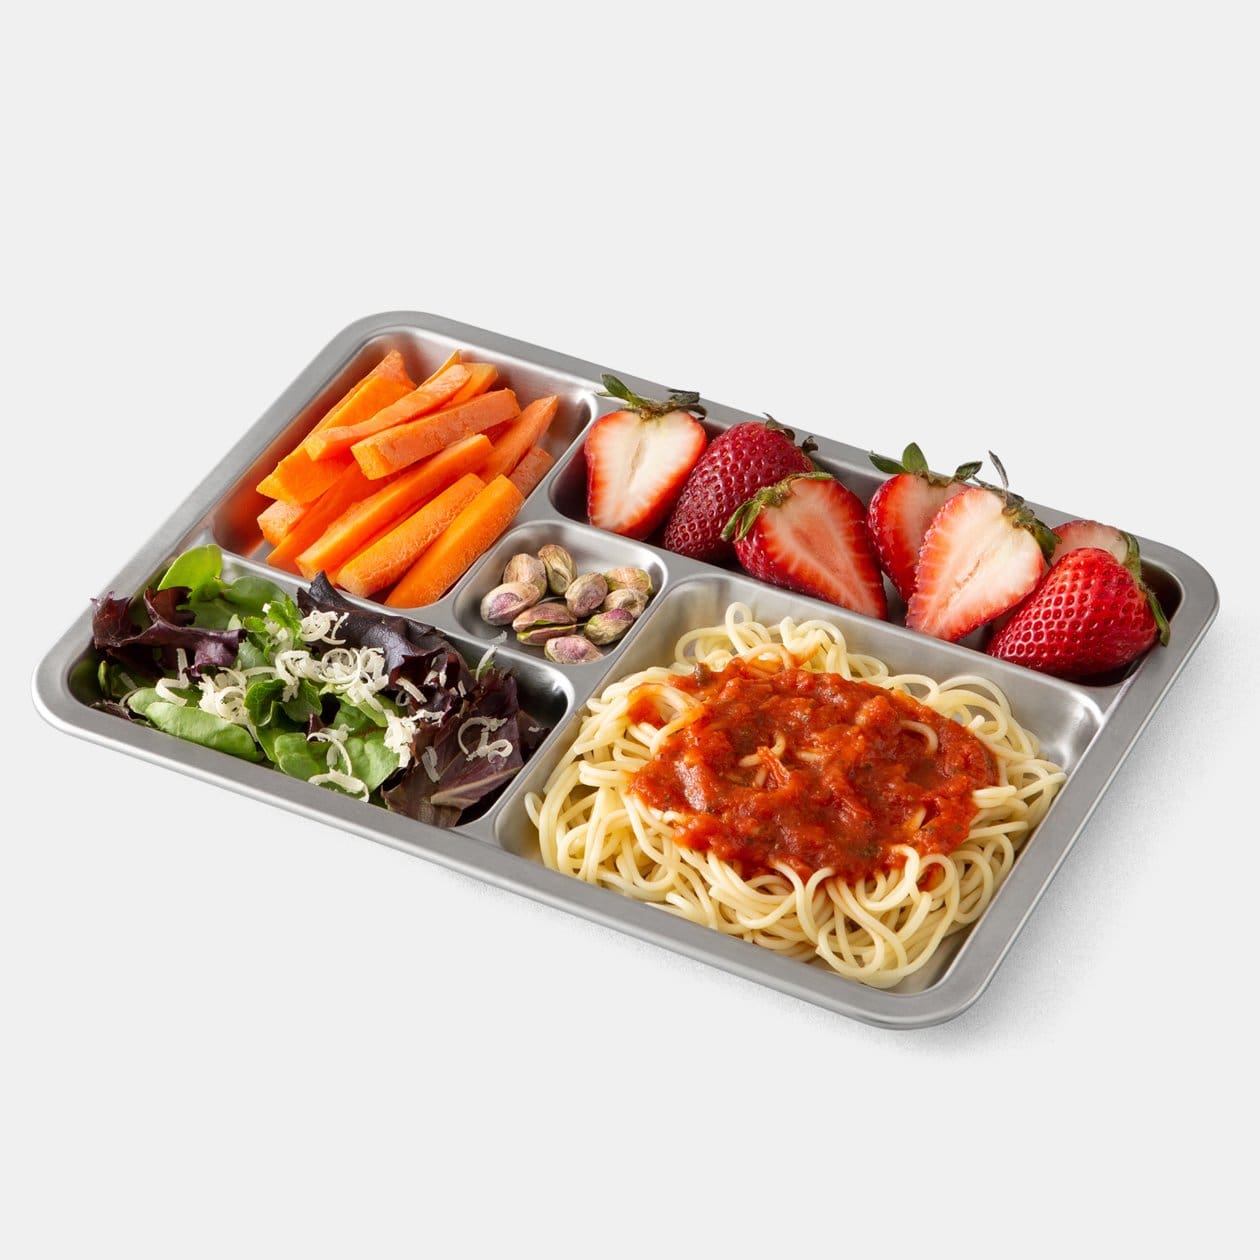 PlanetBox Rover Stainless Steel Bento Lunch Box 